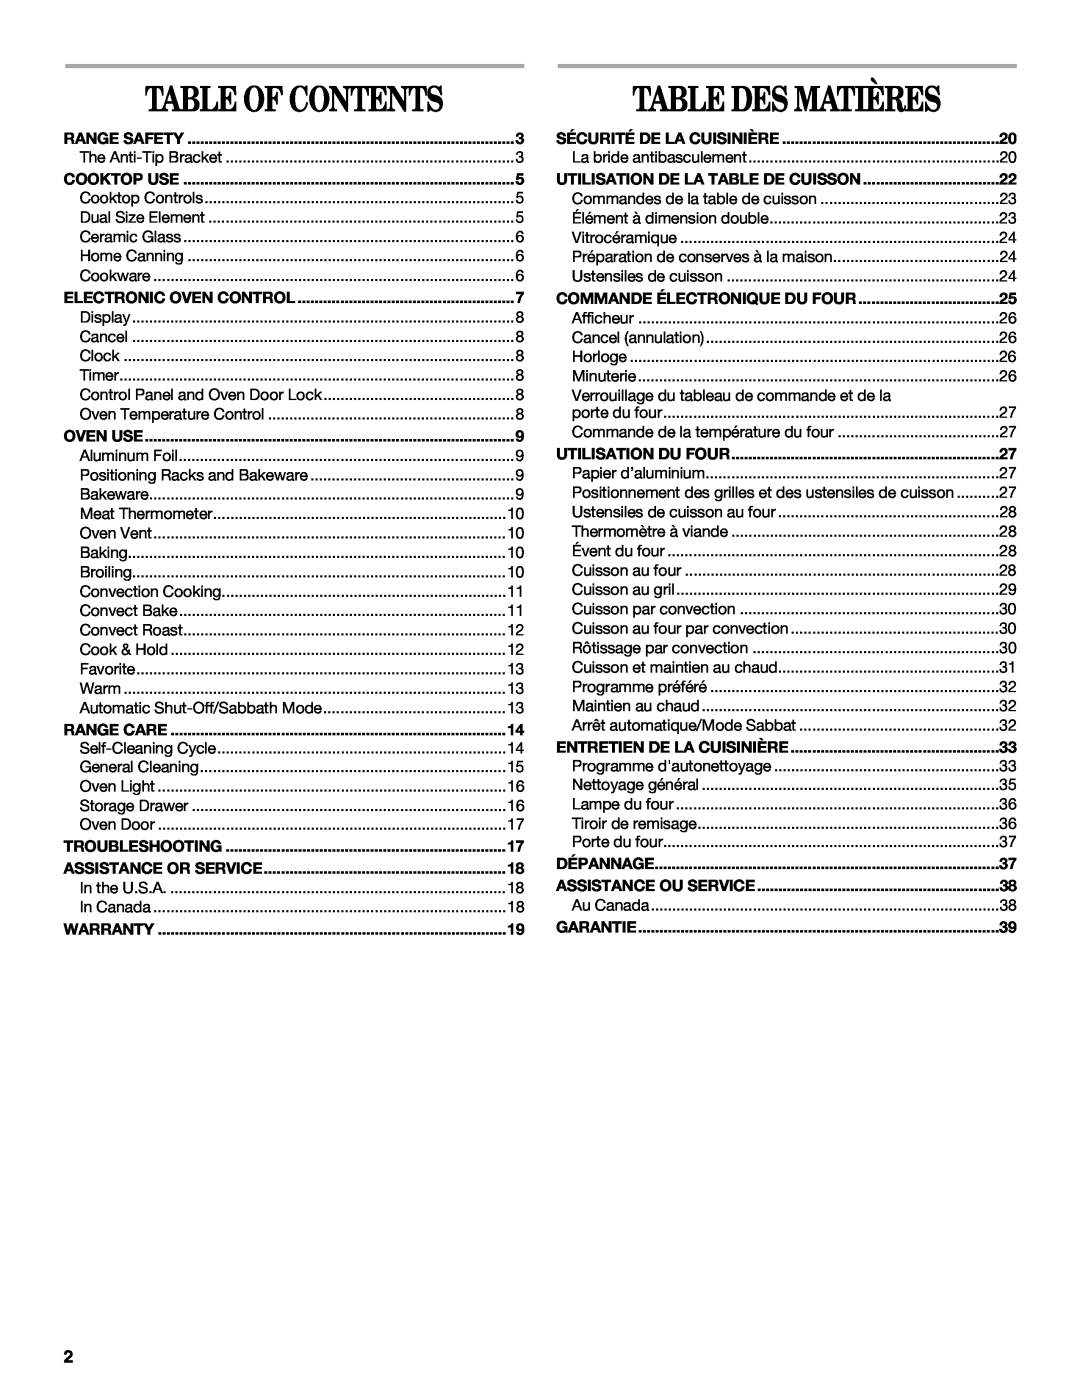 Whirlpool GY399LXUB, GY399LXUQ, GY399LXUS, GY397LXUQ, GY397LXUB manual Table Des Matières, Table Of Contents 